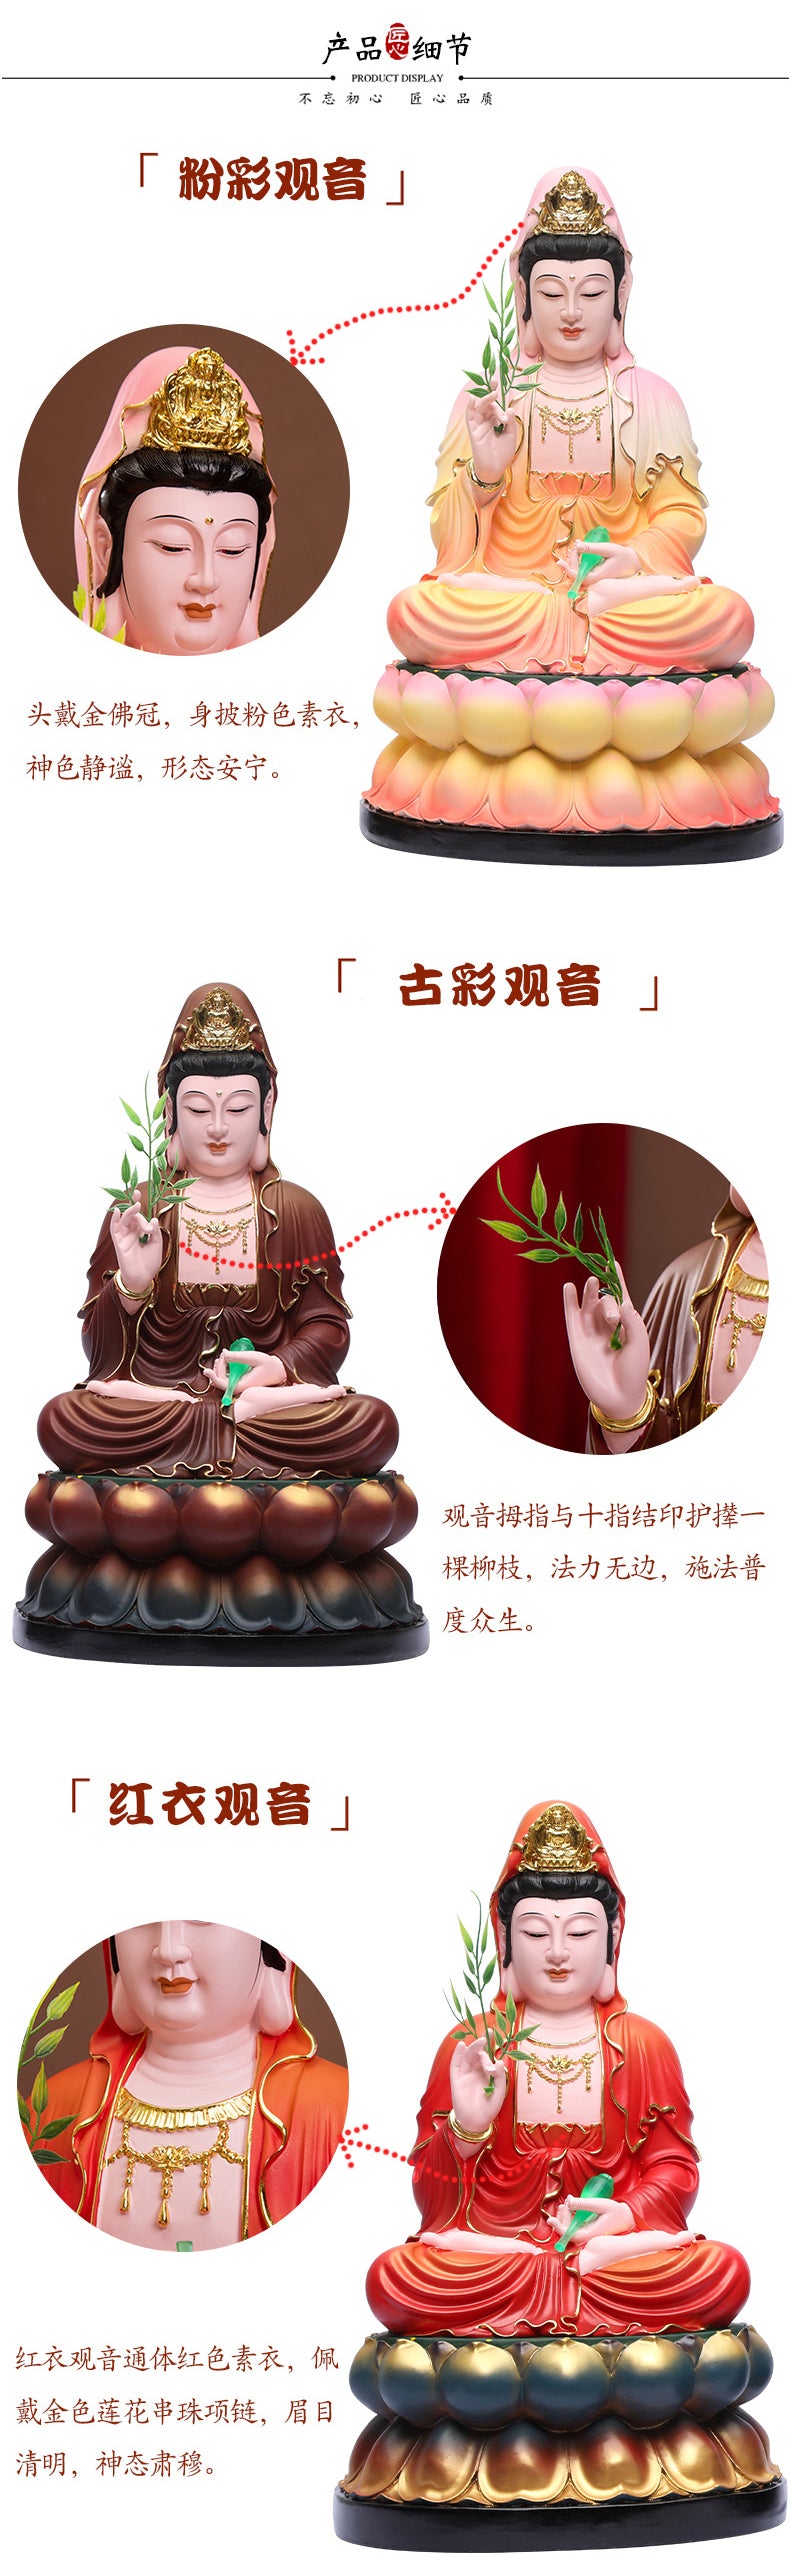 Buddha Quan Yin Goddess of Mercy Statue for Sale, Goddess of Compassion Quan Yin Sculpture, Antique Color Resin Material, Offerings Details 3